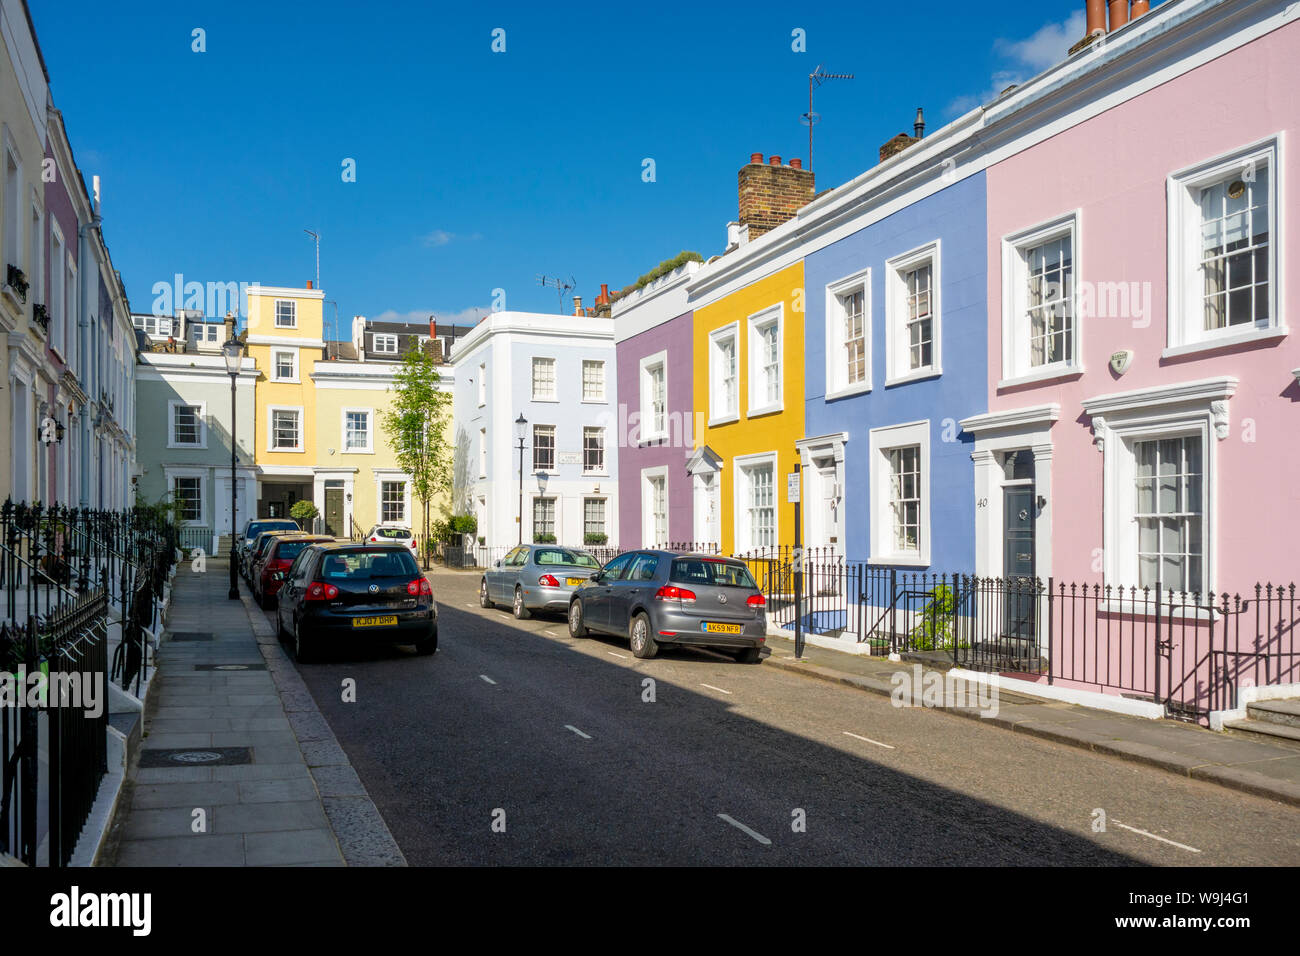 Colourful row of terraced houses in Notting Hill, London, UK Stock Photo